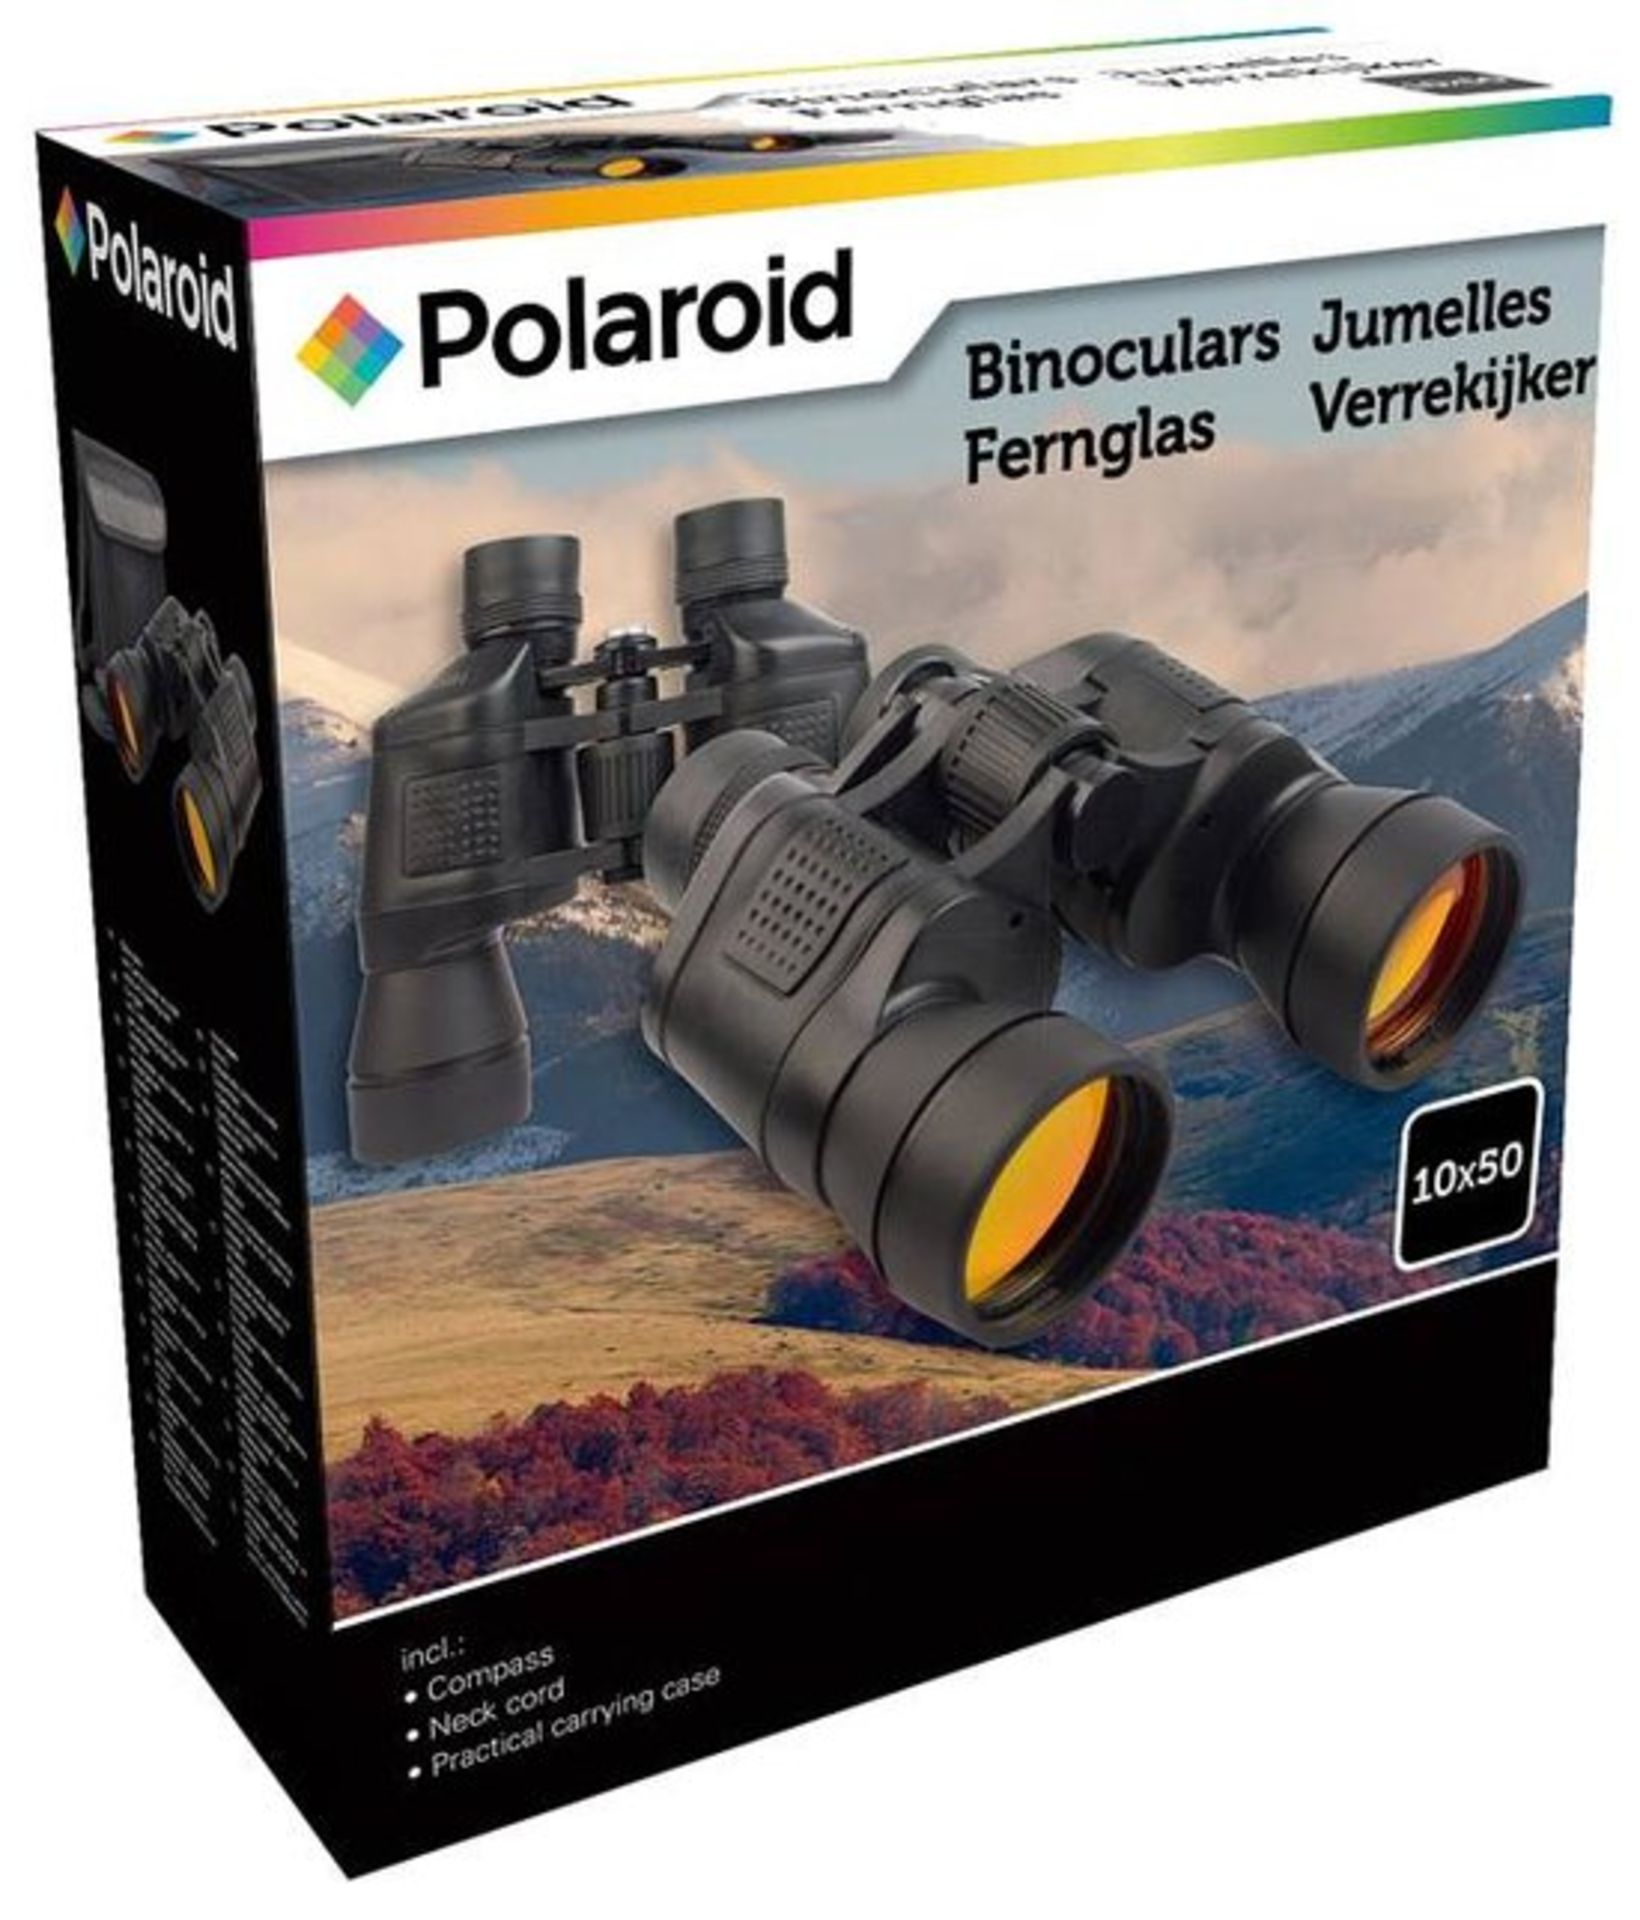 V Brand New Polaroid 10x50 Binoculars with Compass - Neck Cord and Carry Case - Online Price 65.90